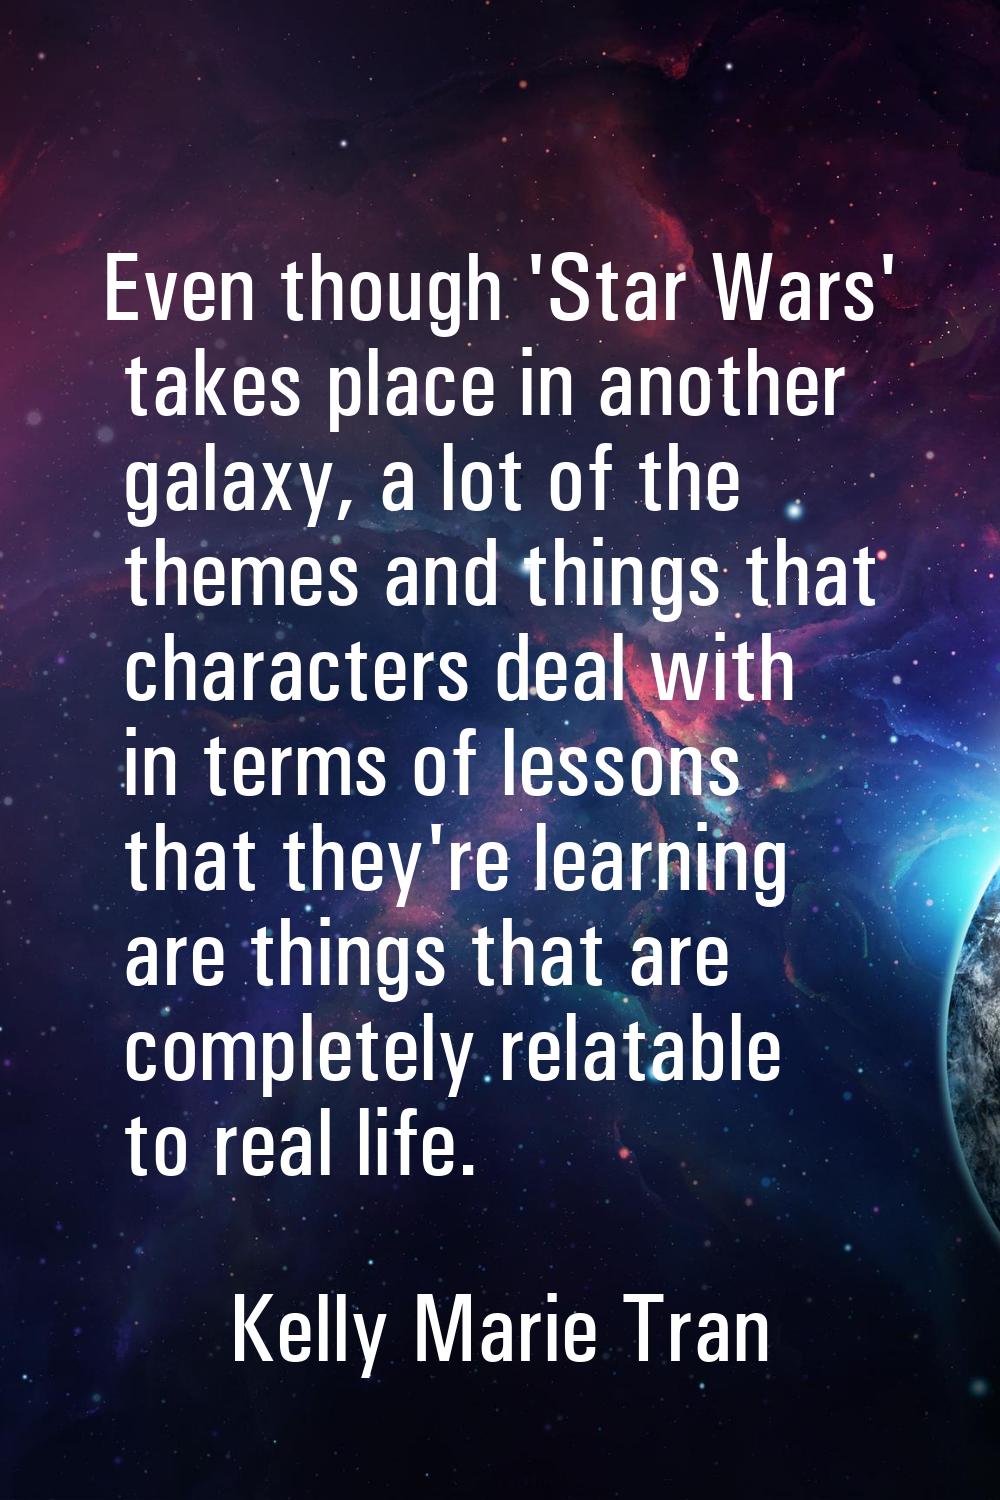 Even though 'Star Wars' takes place in another galaxy, a lot of the themes and things that characte